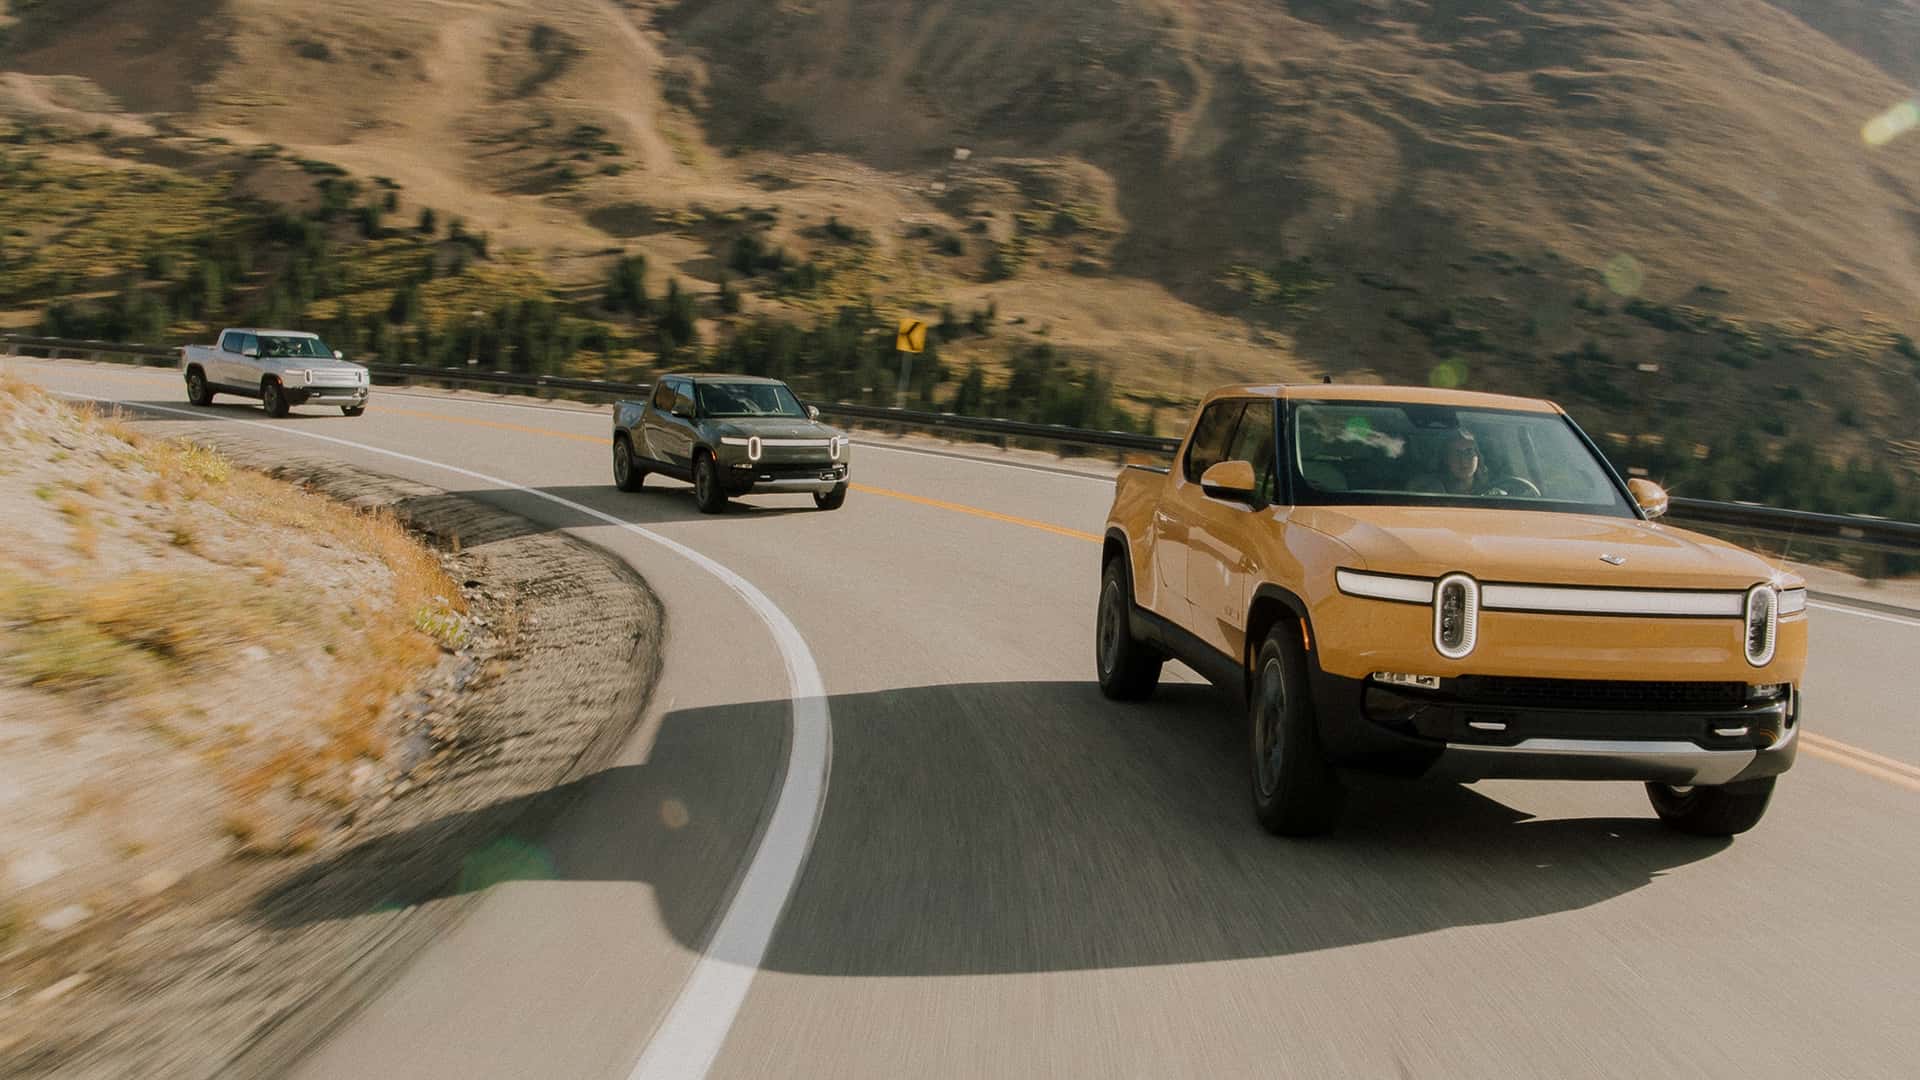 buying an ice vehicle is “like building a horse barn in 1910”: rivian ceo